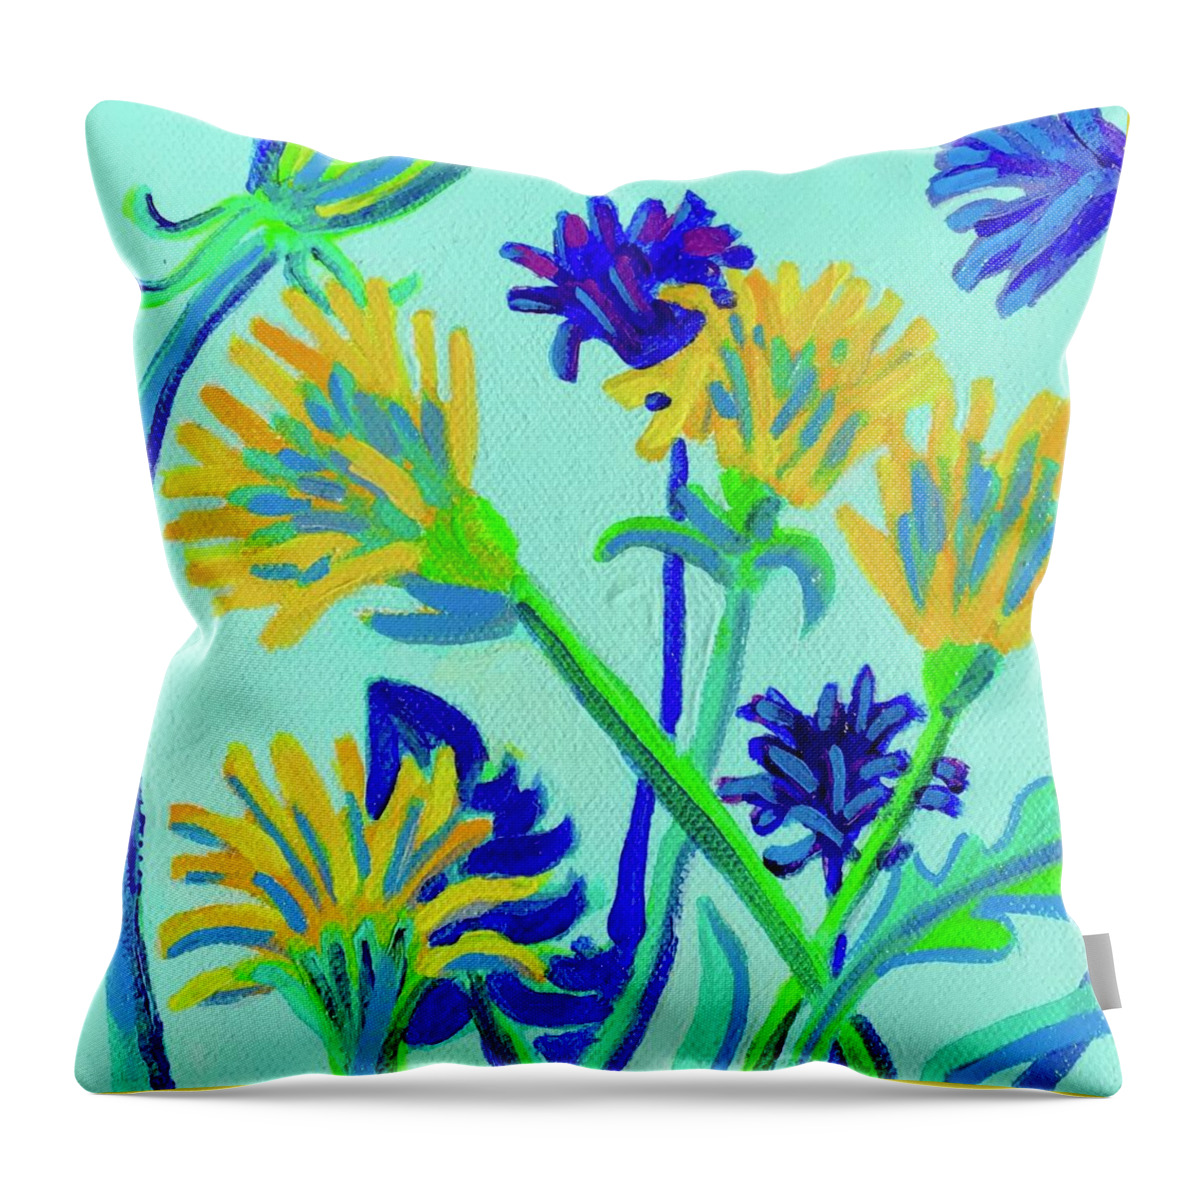 Flowers Throw Pillow featuring the painting Enchanted with Dandelions by Debra Bretton Robinson